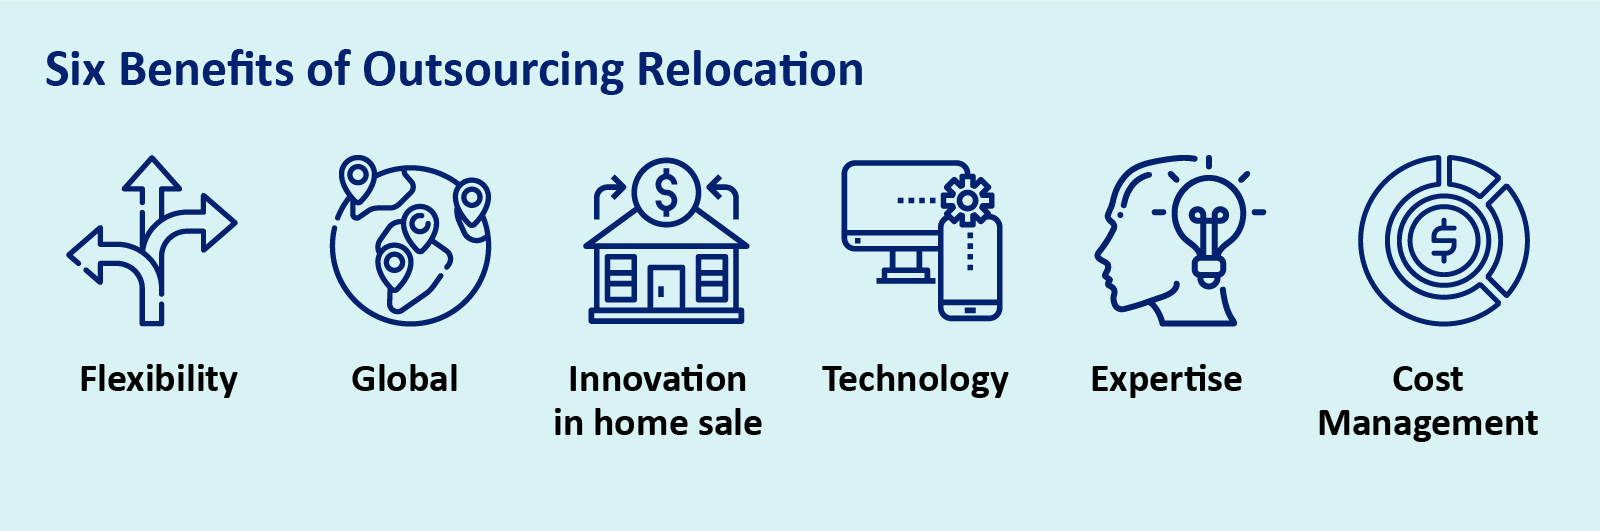 6 Benefits of Outsourcing Relocation